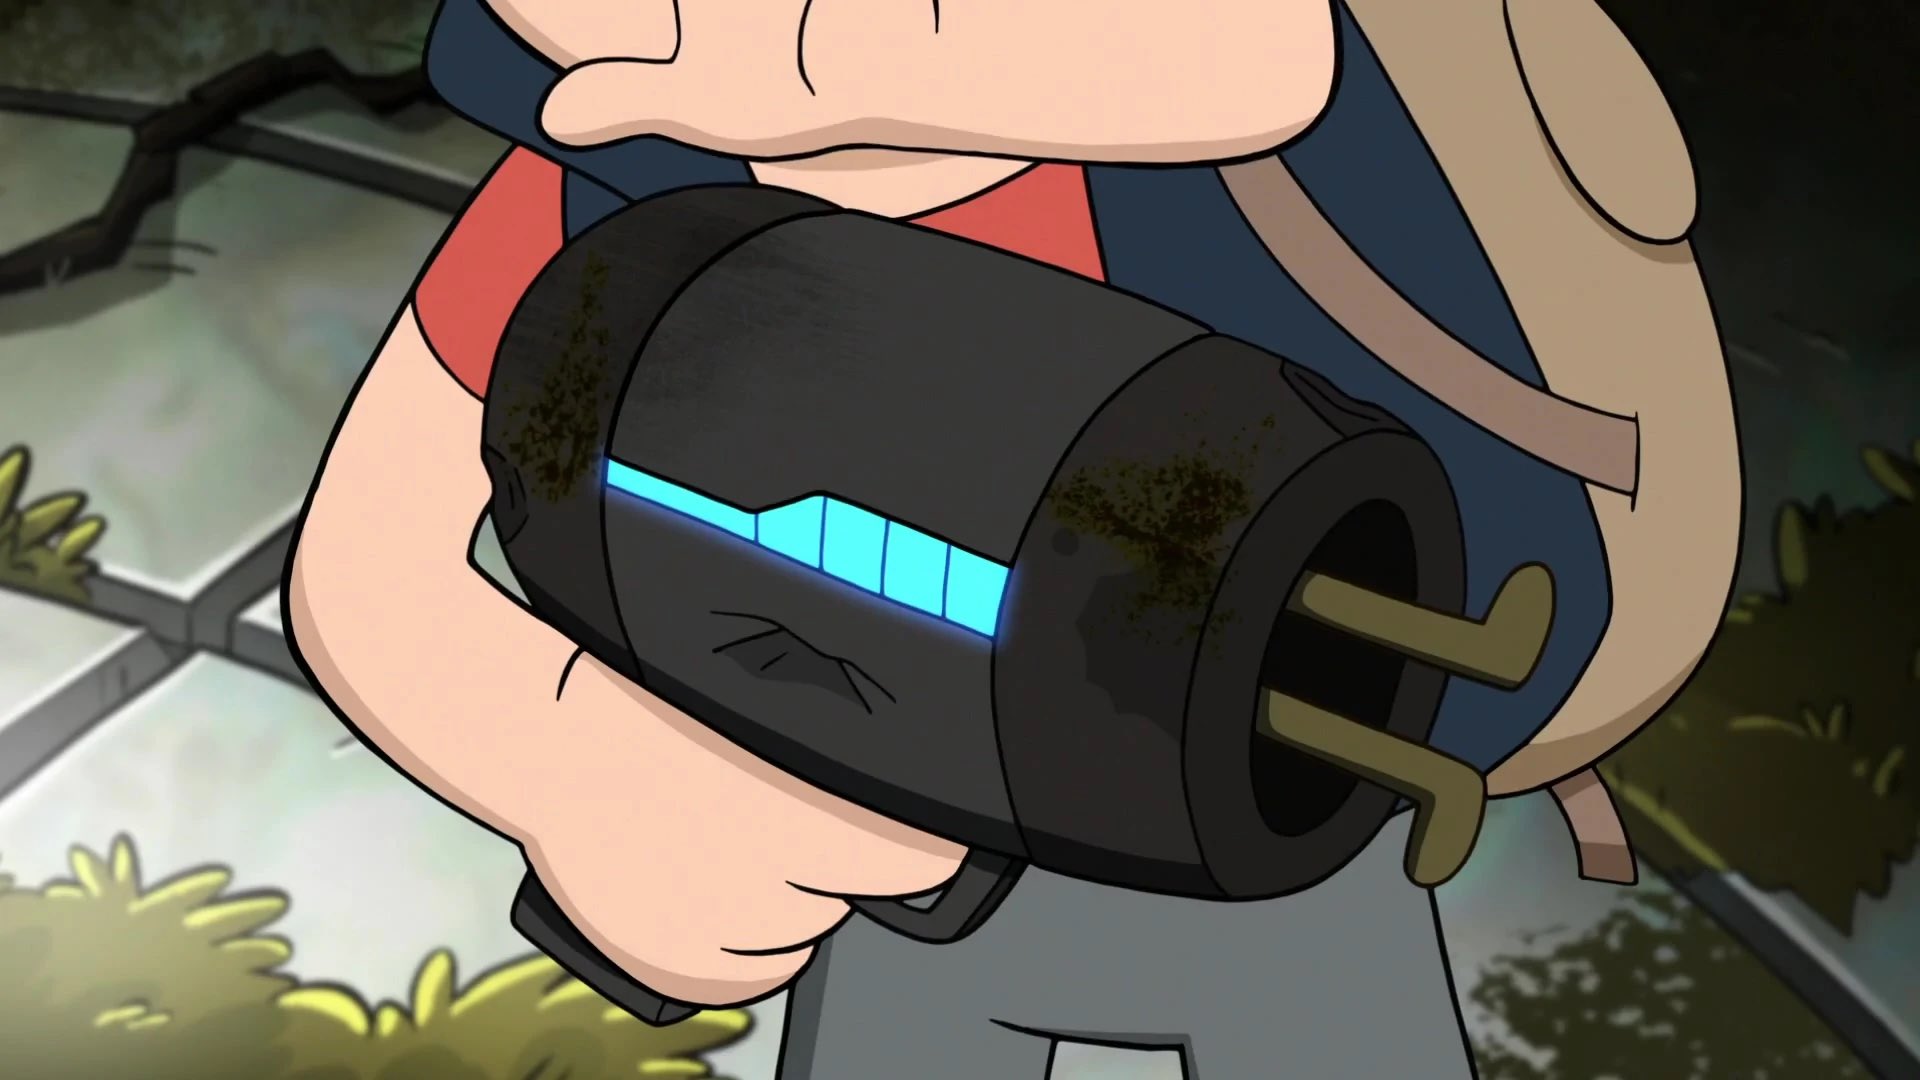 Grappling-Hook Rater on X: The magnet gun from gravity falls is